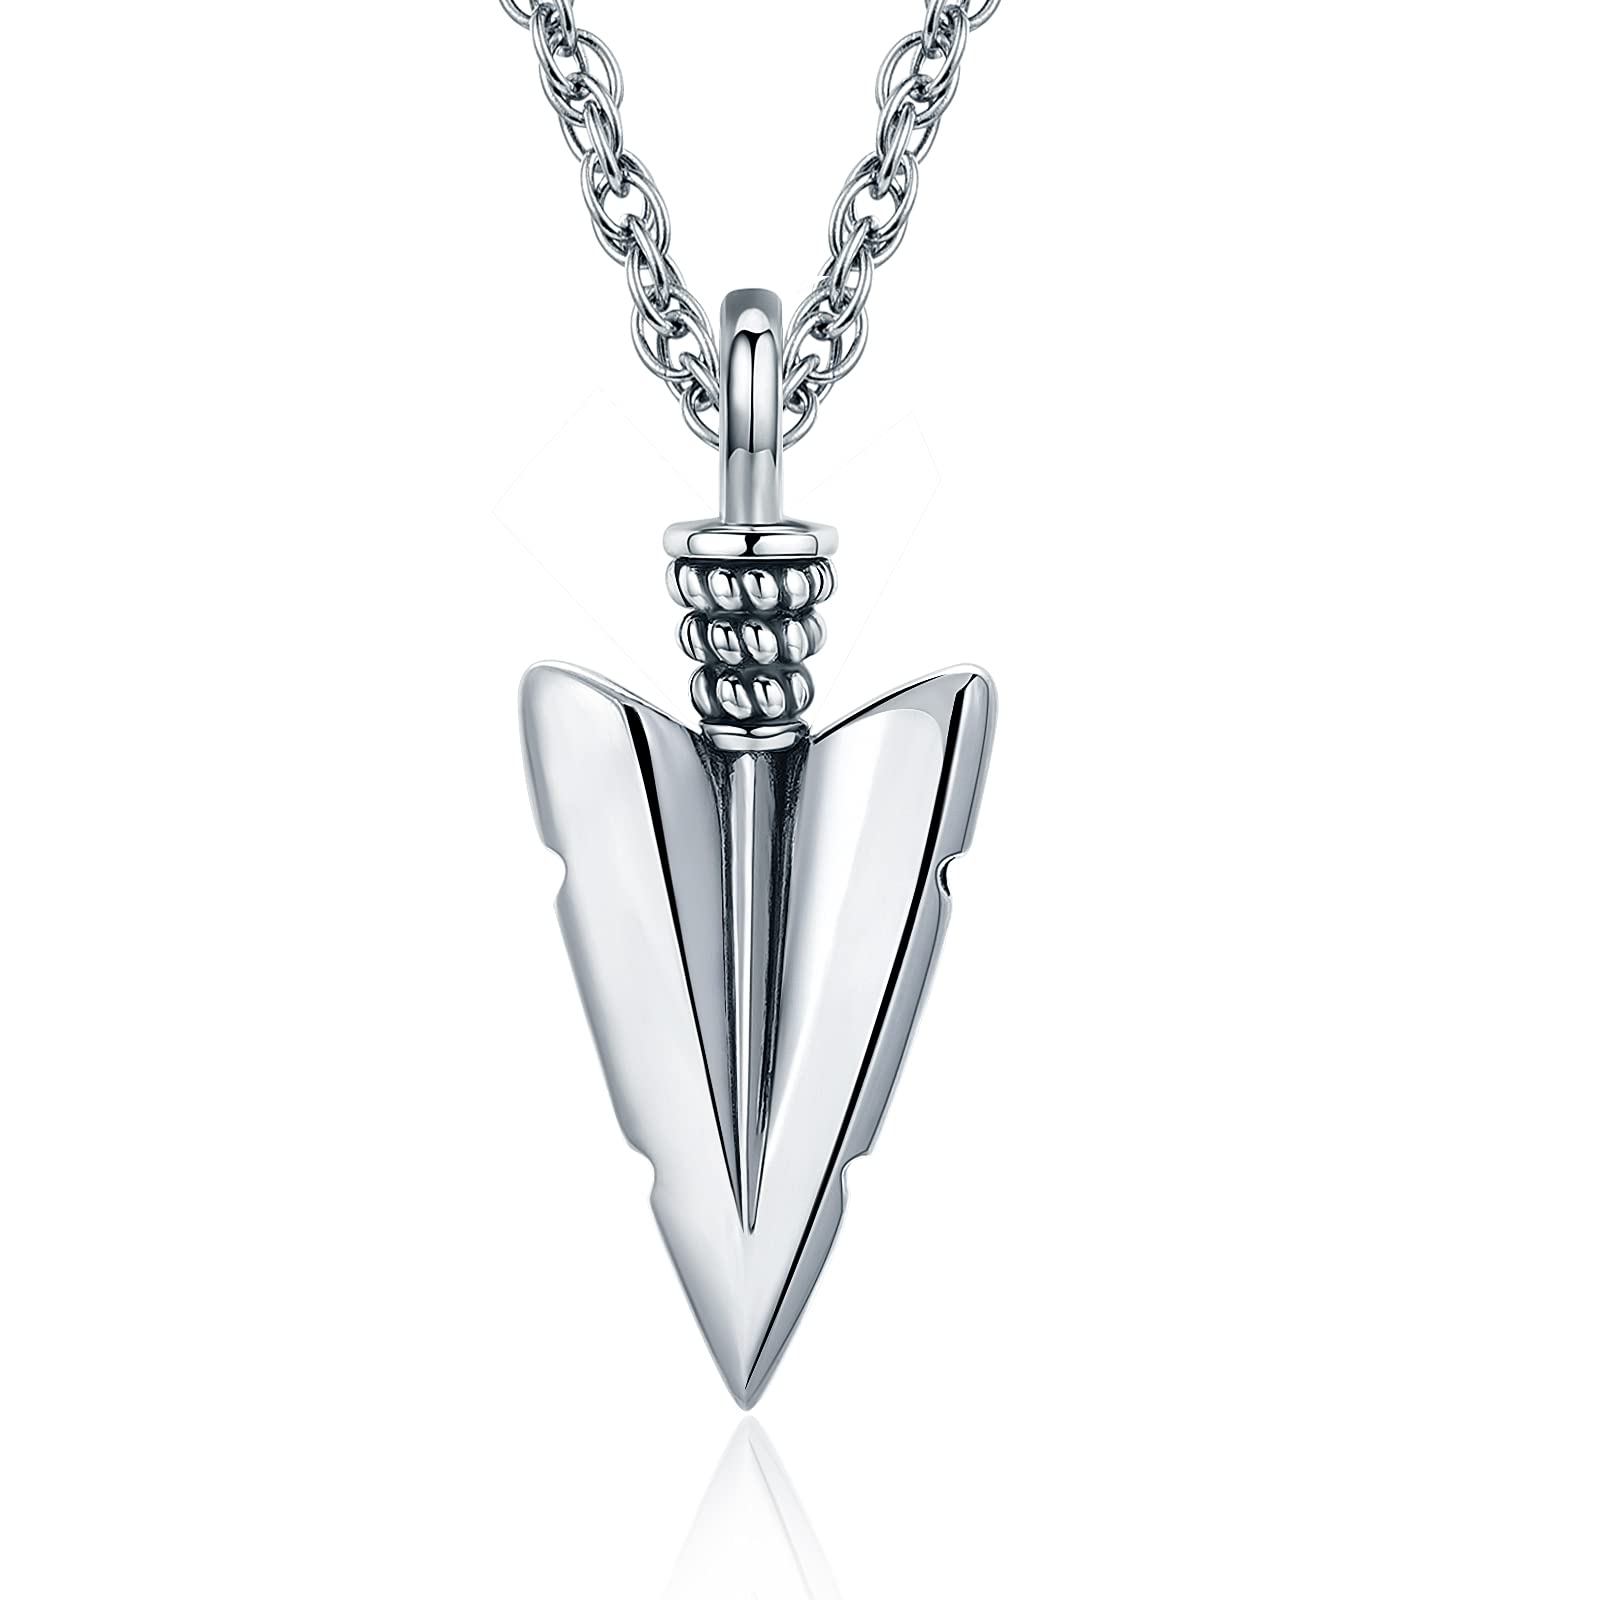 PRAYMOS Arrowhead Mens Necklace S925 Sterling Silver Arrow Jewelry Personalized Pendant for Man Boyfriend Brother Husband Gift,20'' +2'' Chain